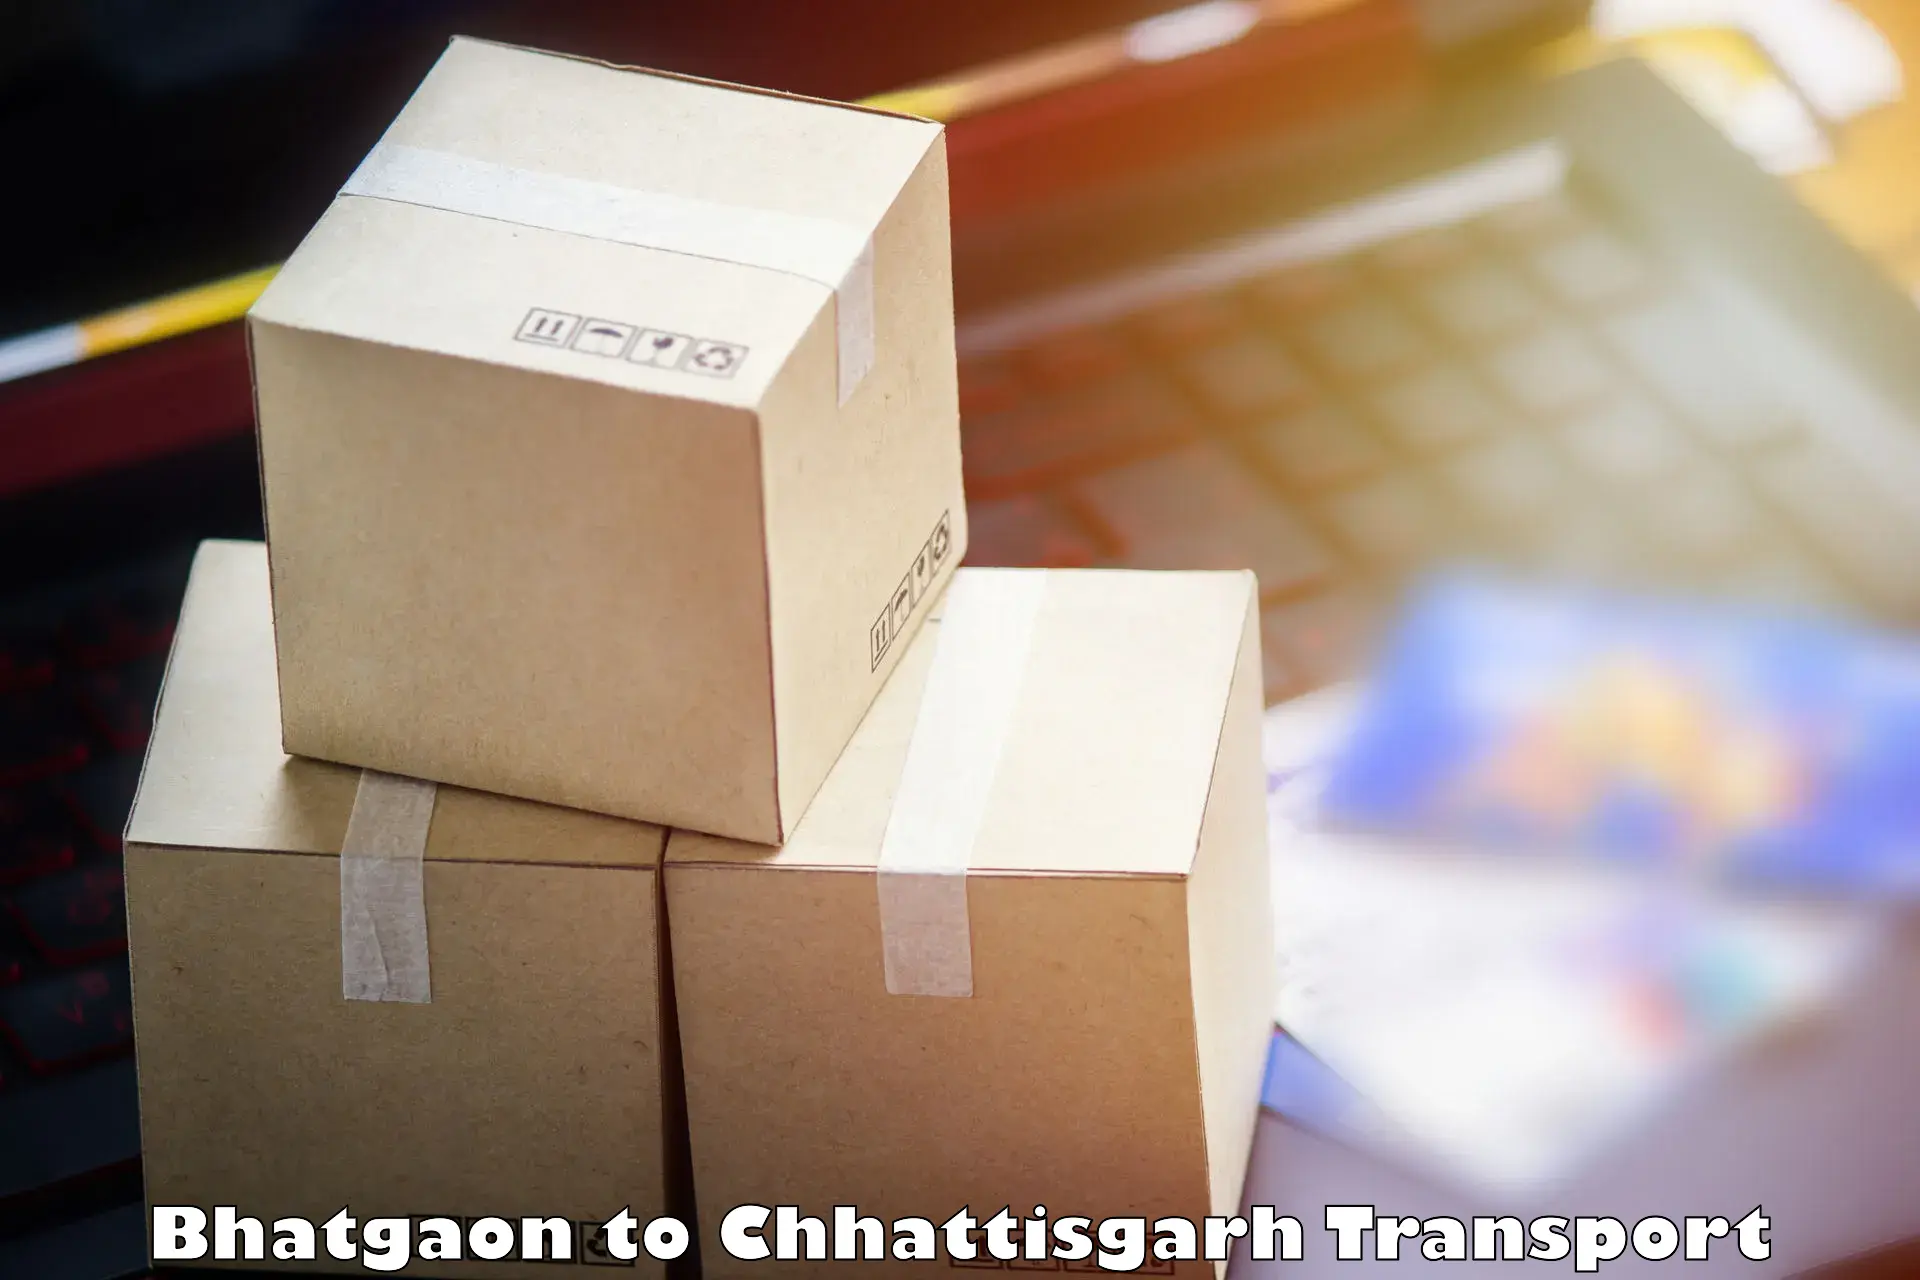 Container transport service Bhatgaon to bagbahra